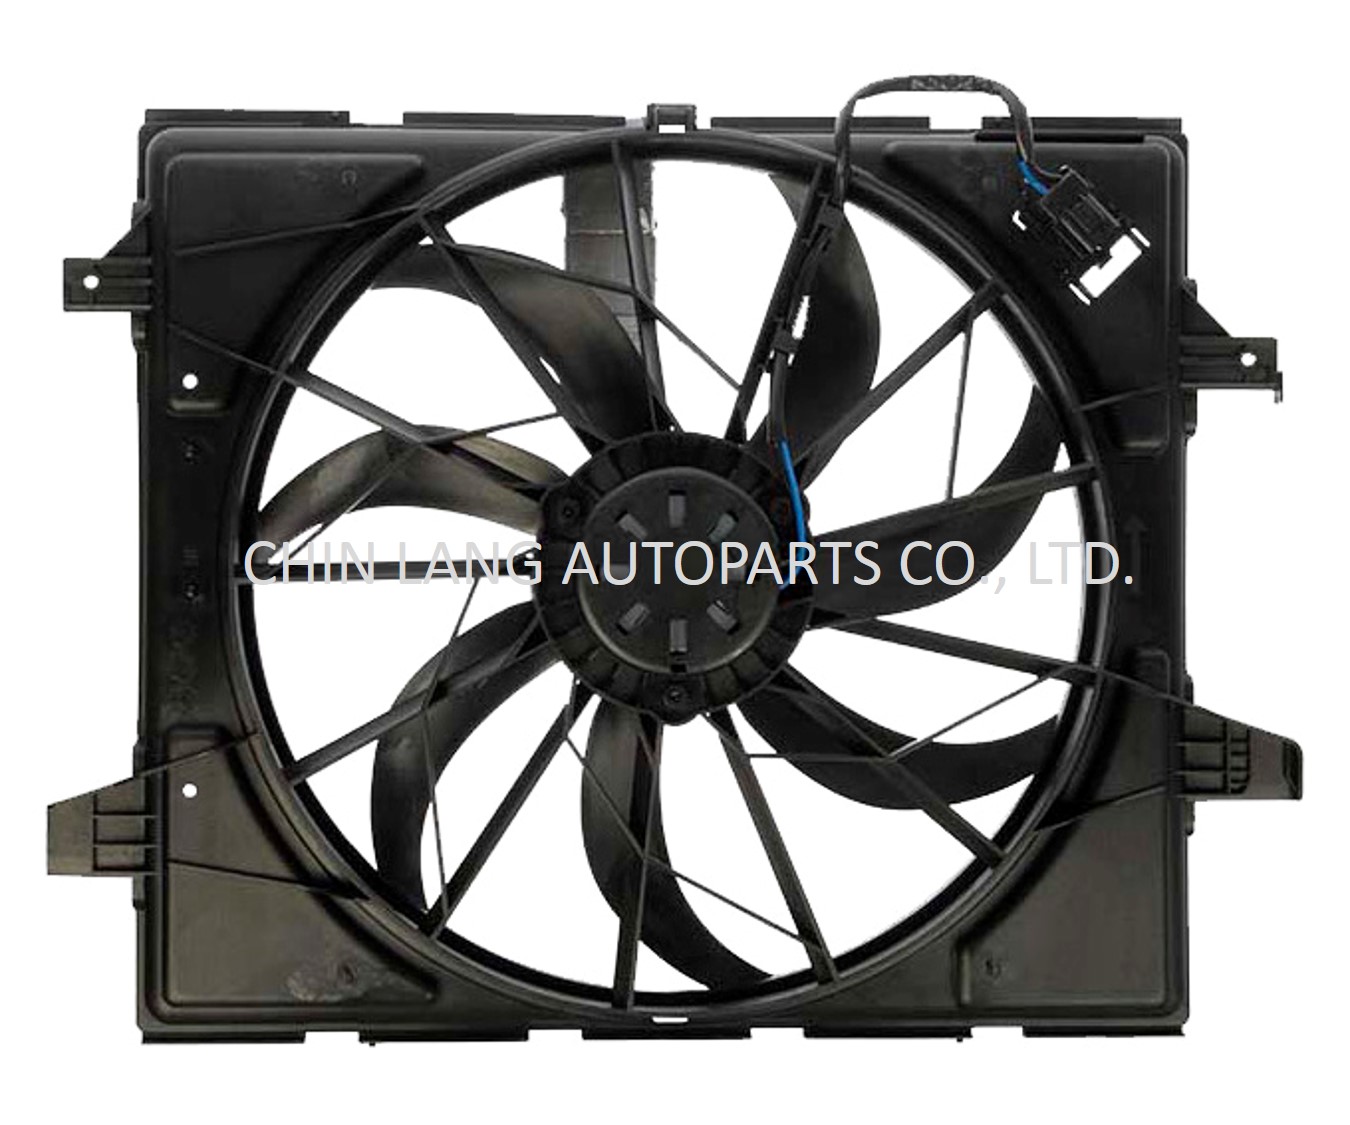 COOLING FAN FOR CHRYSLER JEEP GRAND CHEROKEE 3.6L, 5.7L 2011~ DODGE DURANGO 2011